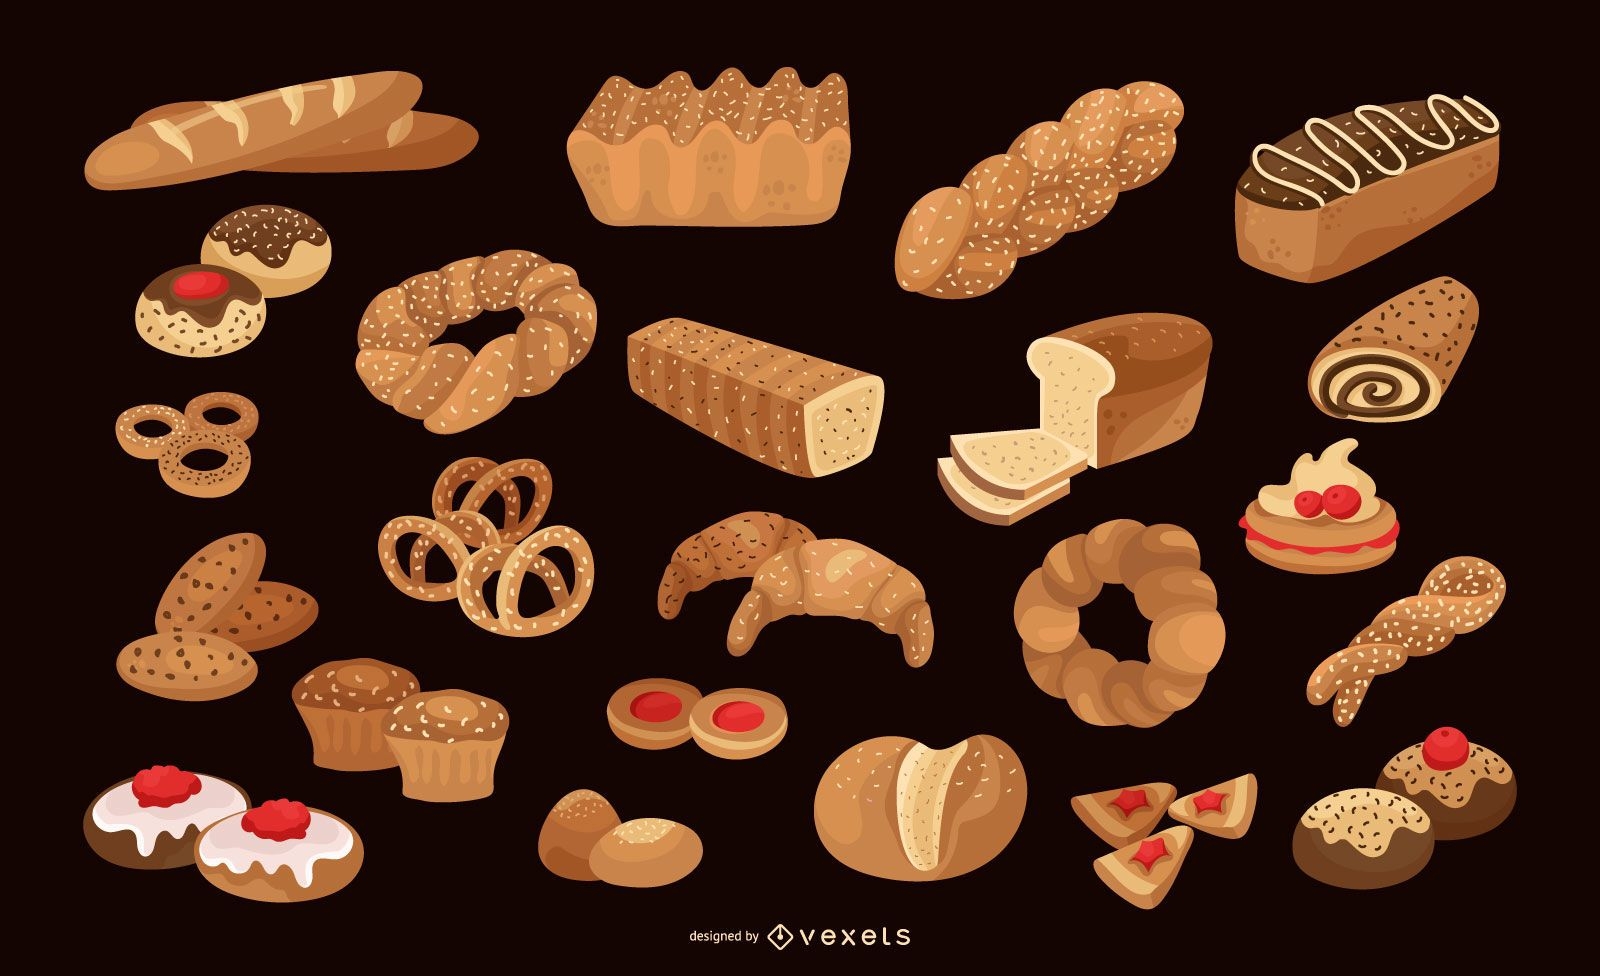 Bakery vector collection